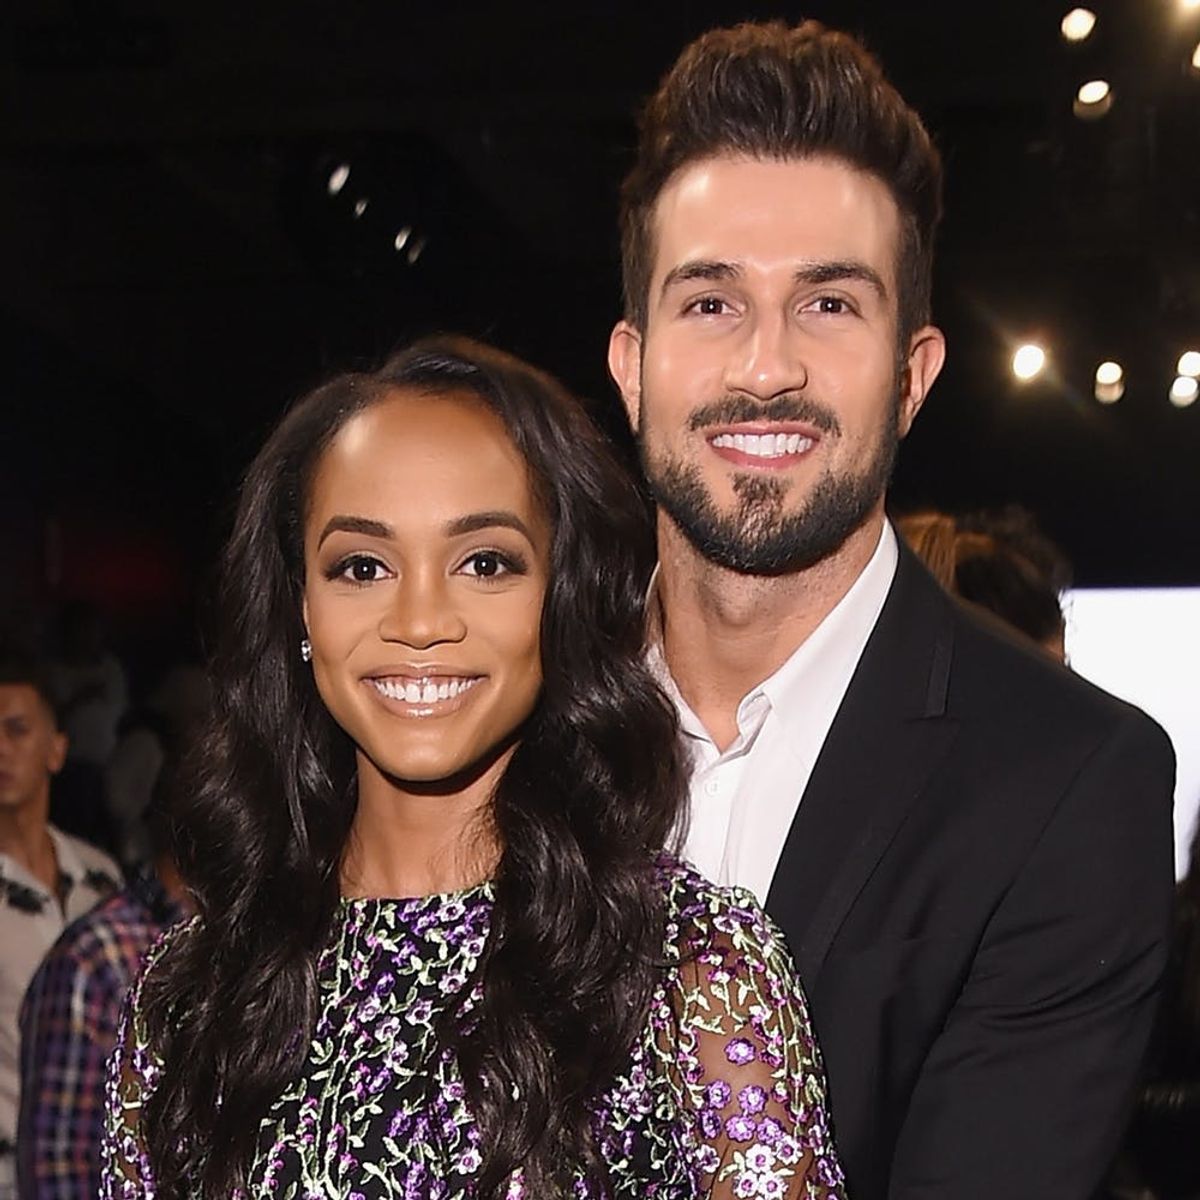 Rachel Lindsay and Bryan Abasolo Threw an Engagement Bash With Their Bachelor Nation Besties